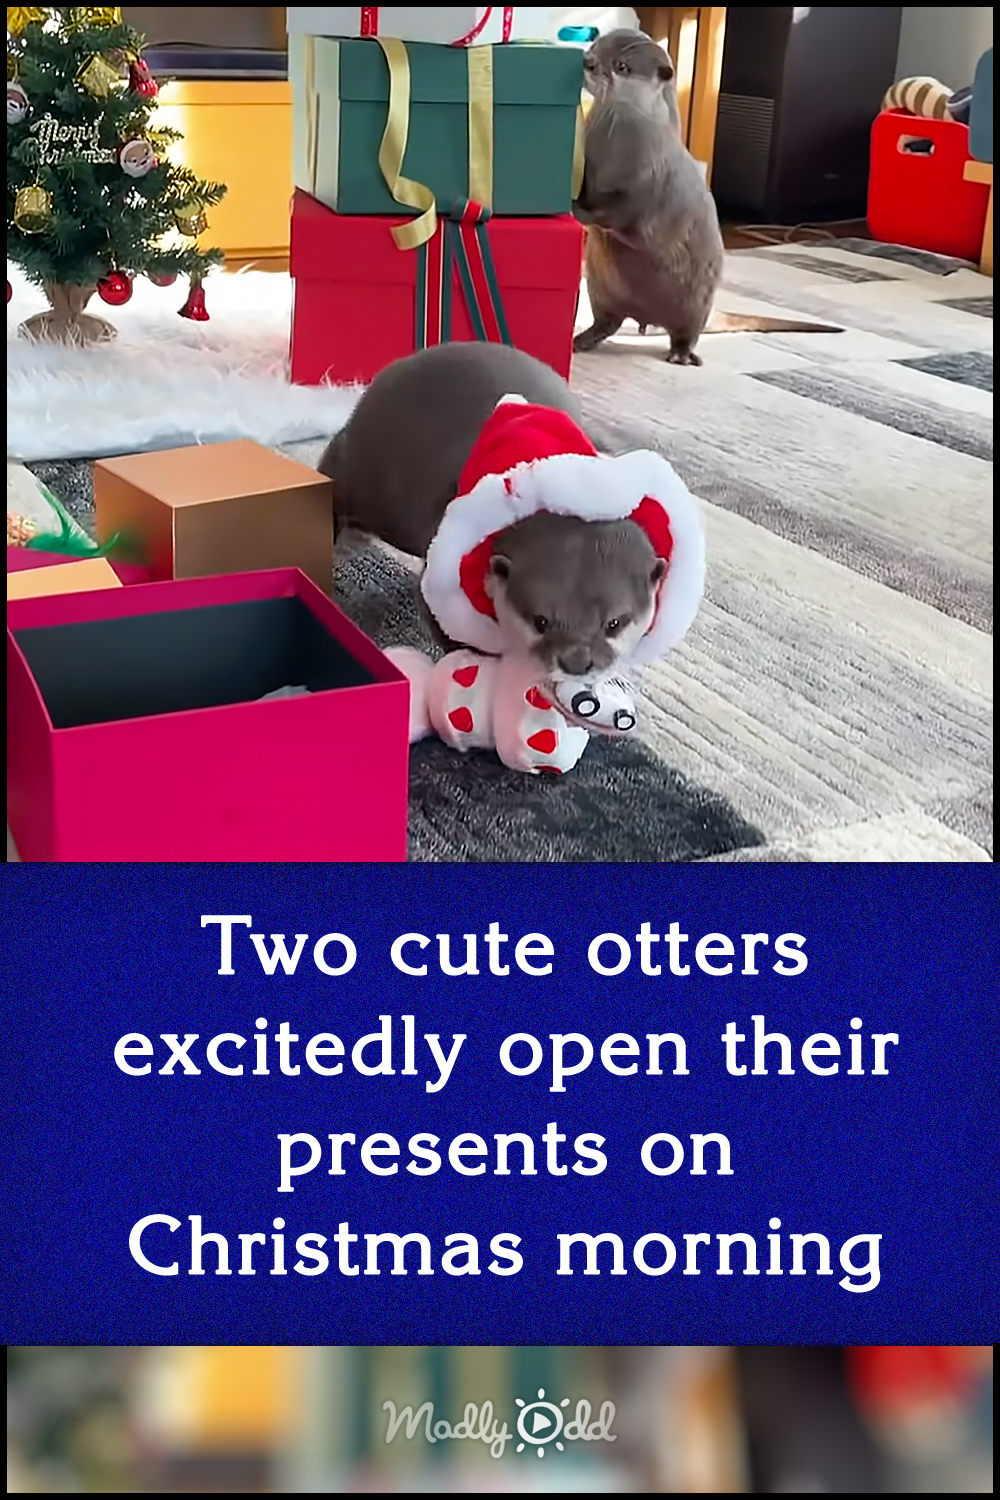 Two cute otters excitedly open their presents on Christmas morning